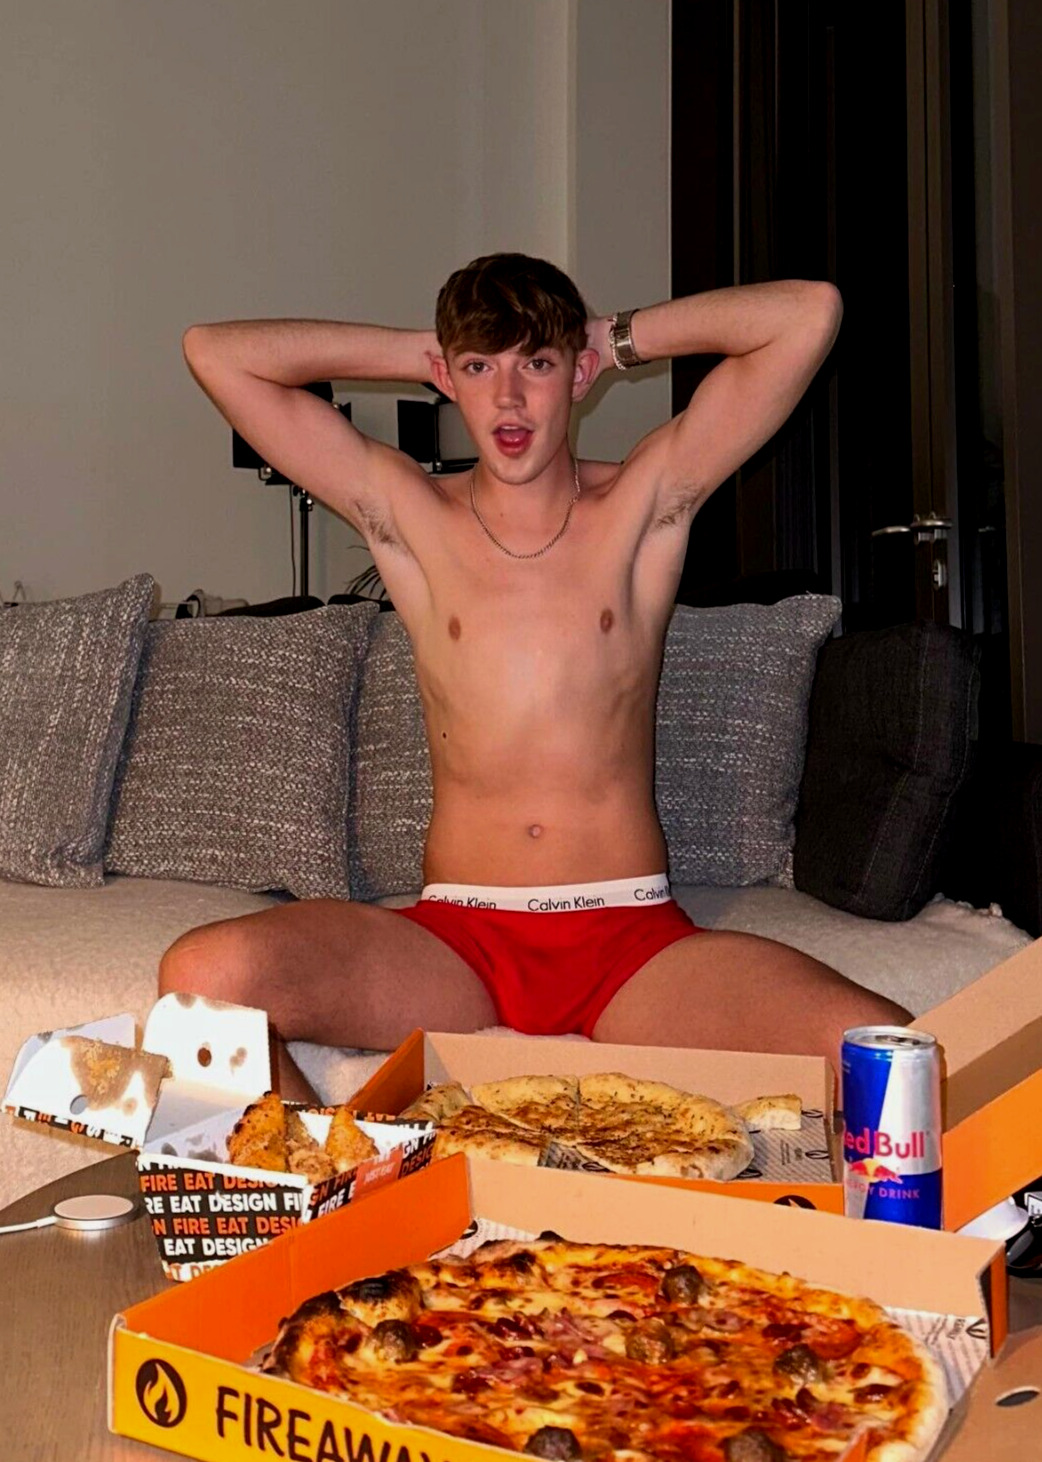 Shirtless Bare Chest College Male Frat Jock Pizza Party Photo 4X6 H252